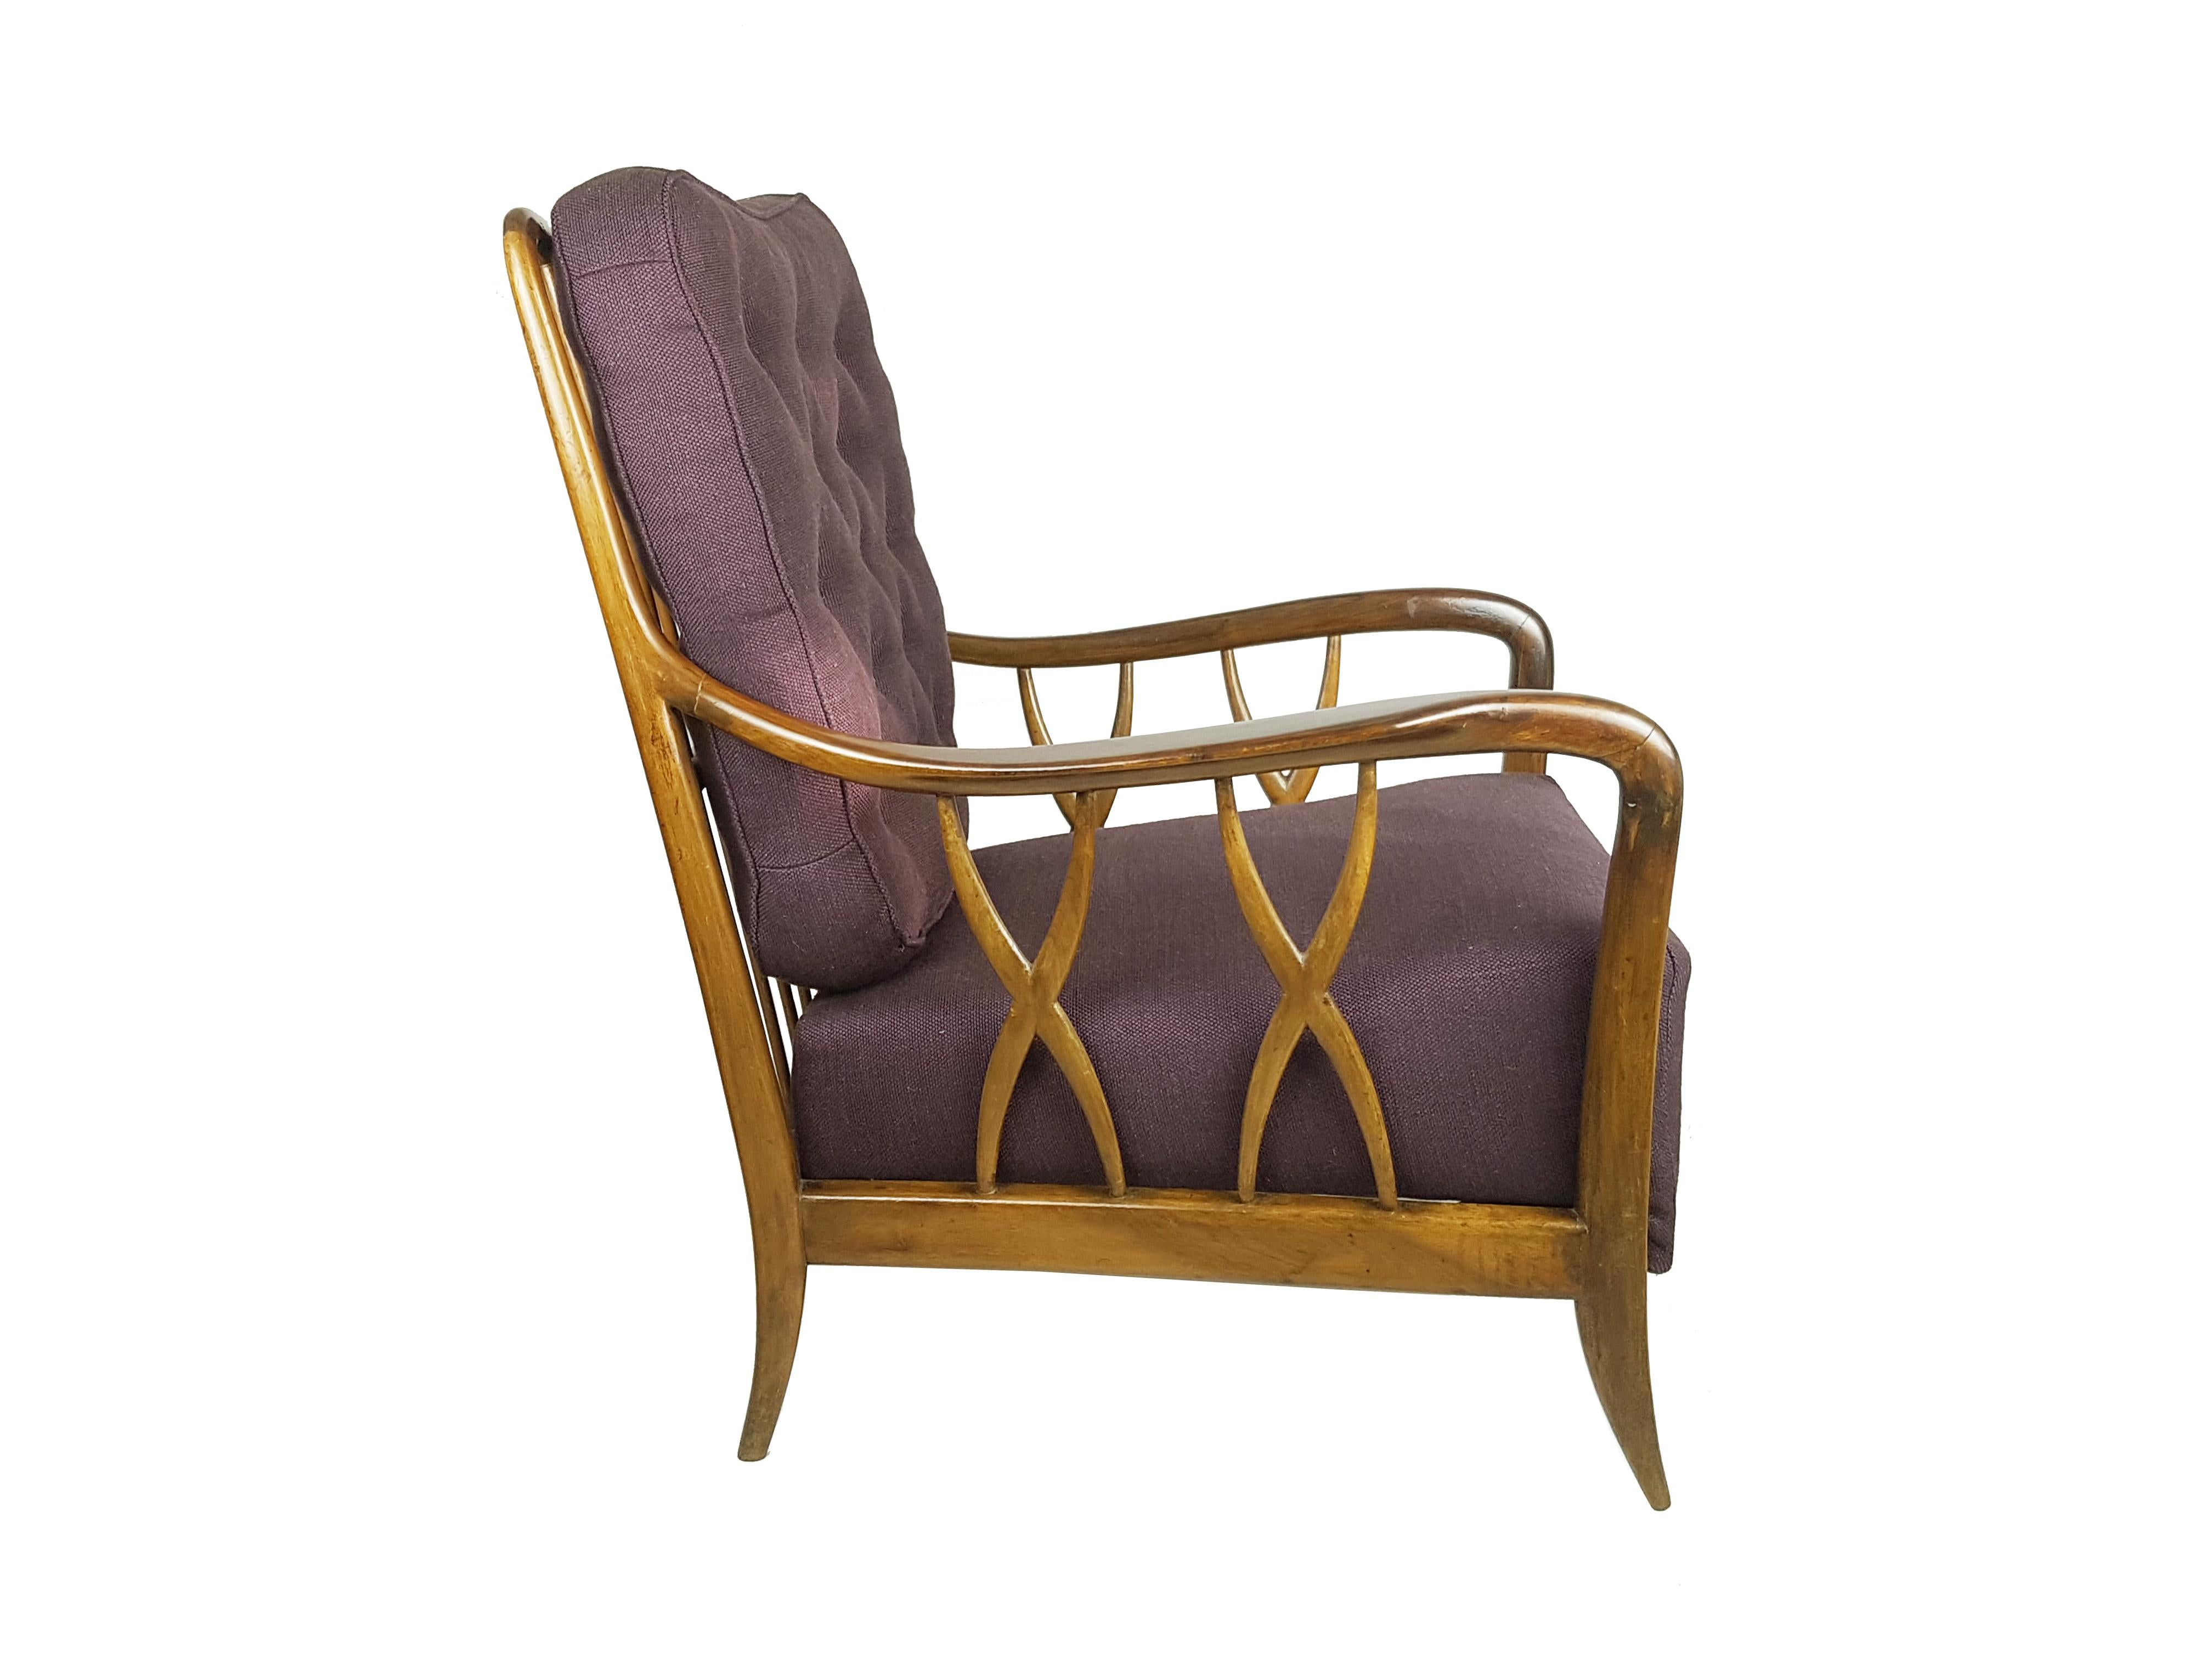 Wonderful armchair in wooden structure with purple fabric upholstered cushions. Due to its style and high quality the armchair has been attributed to the 1940-50s Paolo Buffa's production.
Partially restored and refinished. Cushions have been